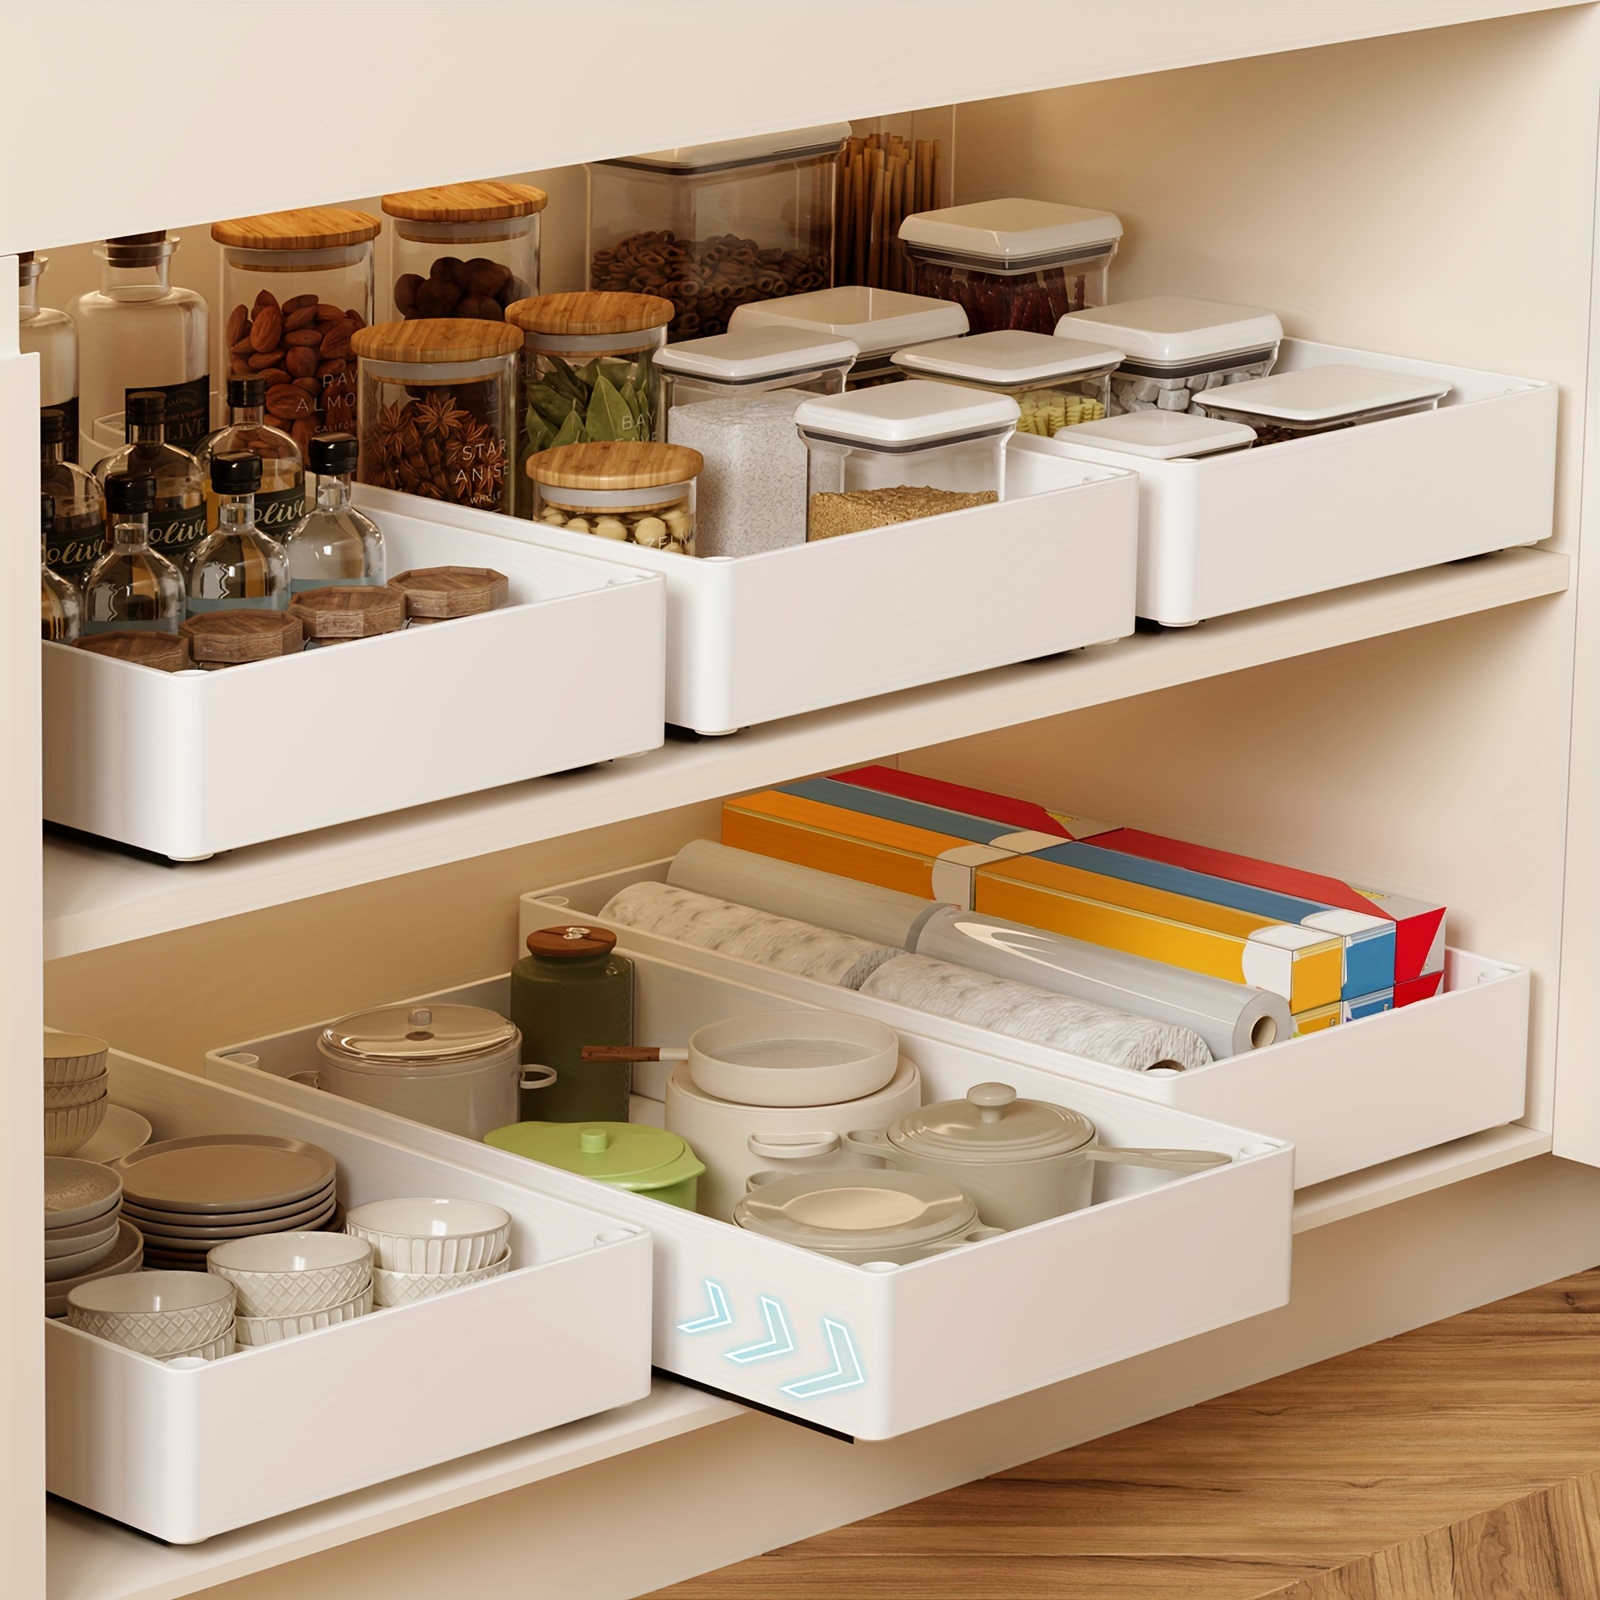 

1/2pcs Pull-out Cabinet Organizer Bins, Adhesive Sliding Drawers, Adjustable Drawer Organizers For Under Sink Storage, Bathroom Shelves, Bathroom Accessories For Pantry, Cupboard